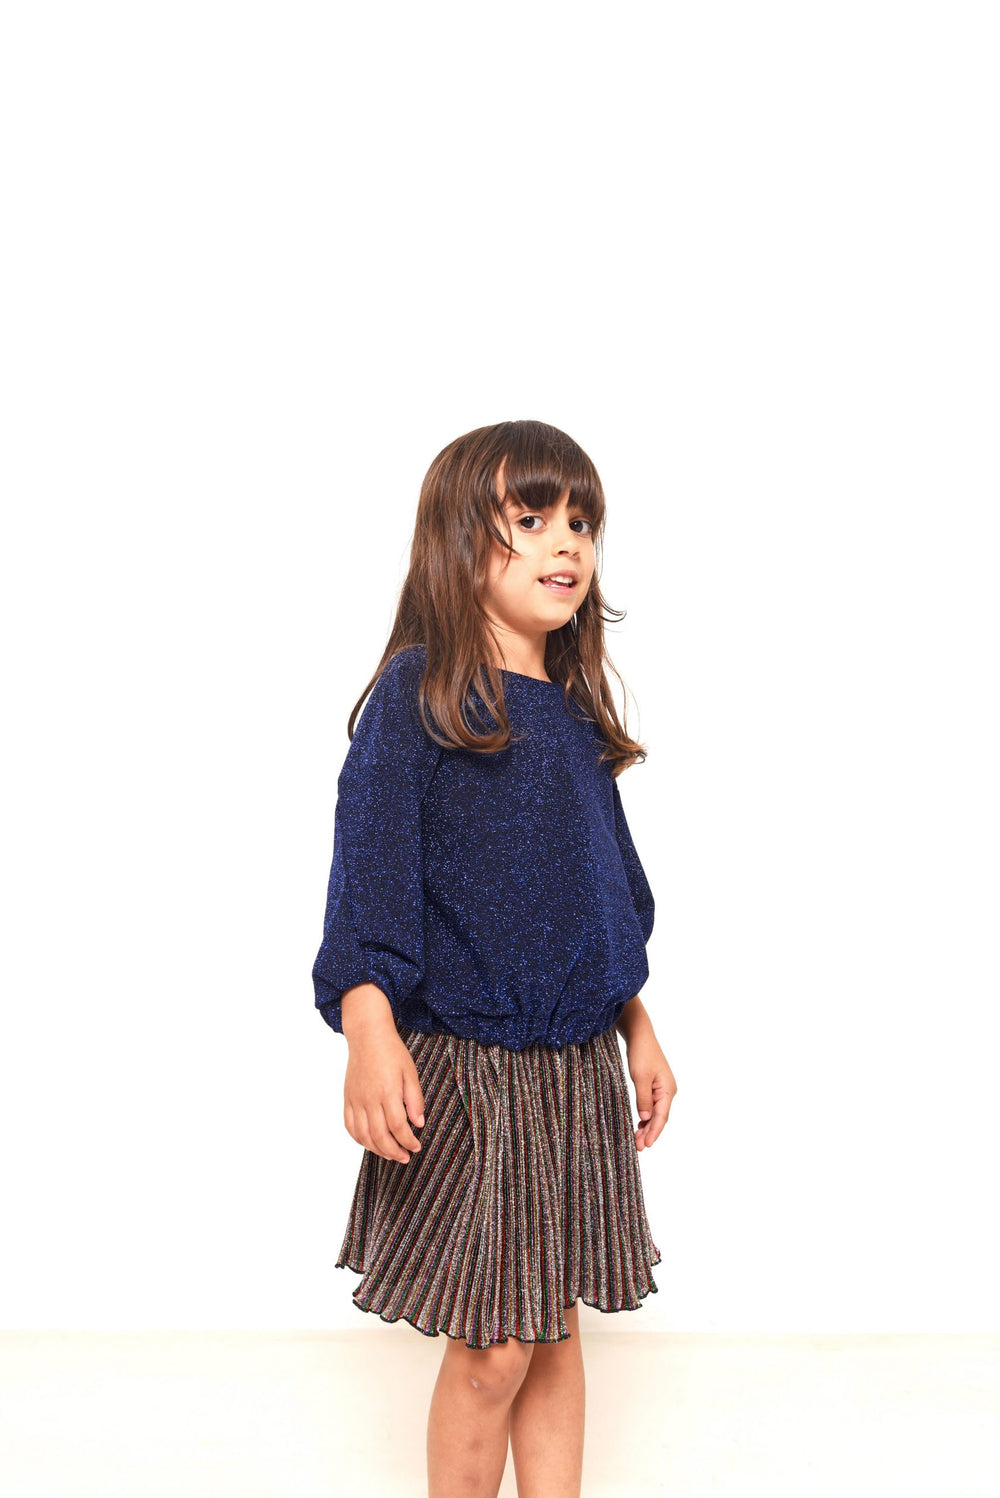 Child wearing the Child/Teen Goldie Top sewing pattern from Fibre Mood on The Fold Line. A jumper/knit top pattern made in French terry, sweater knits or ponte roma fabrics, featuring a loose-fit, round neck, snap closure on one shoulder, dropped shoulder